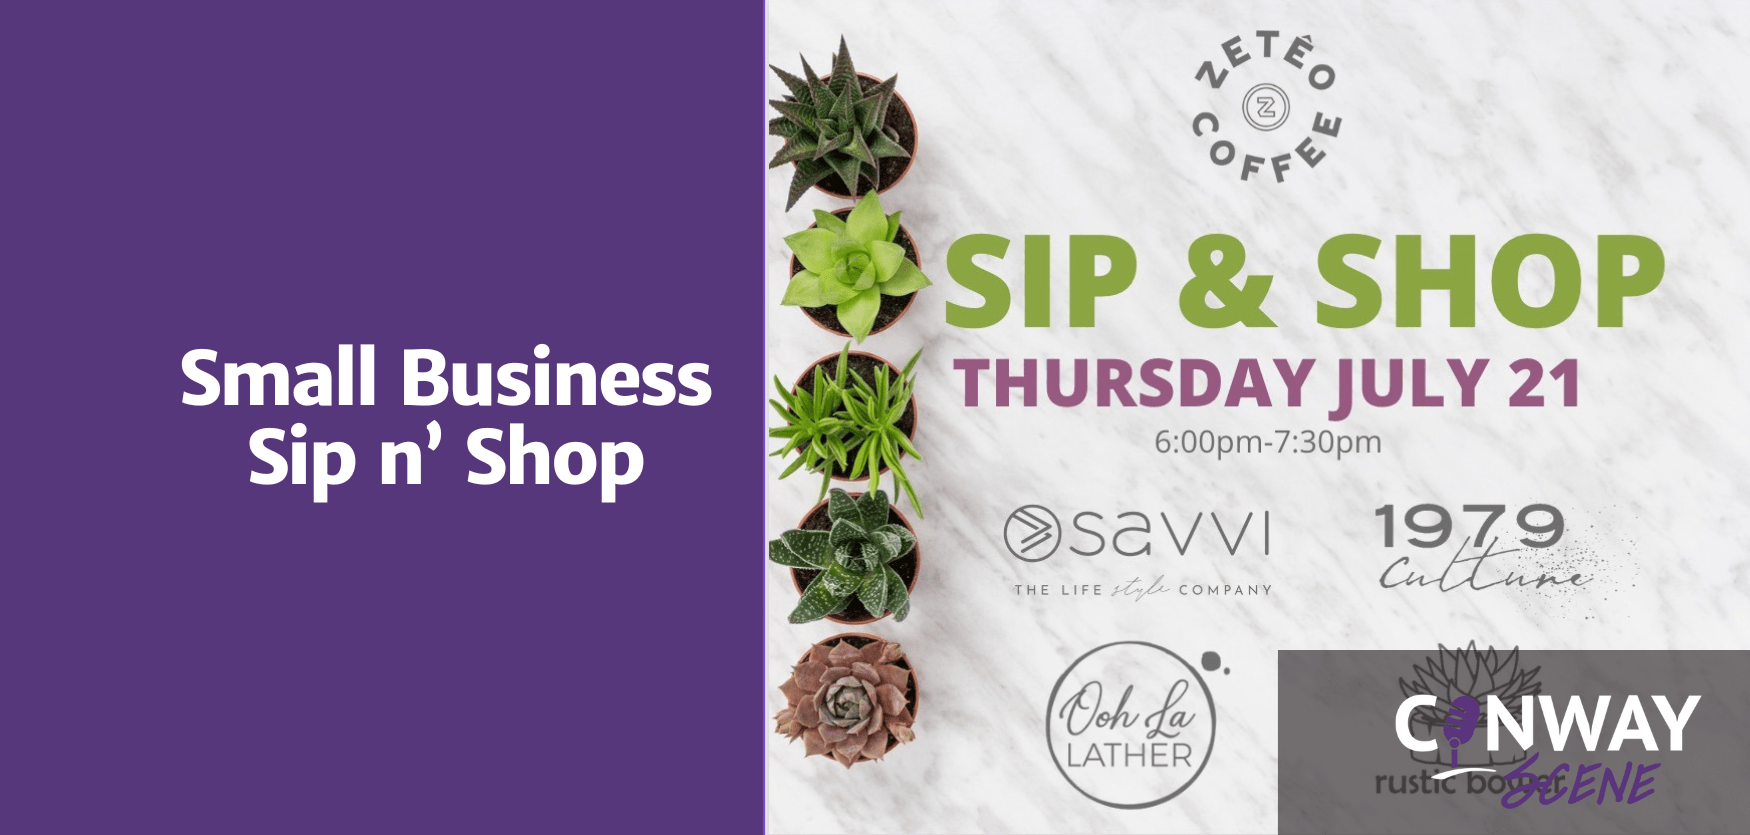 Small Business Sip n’ Shop